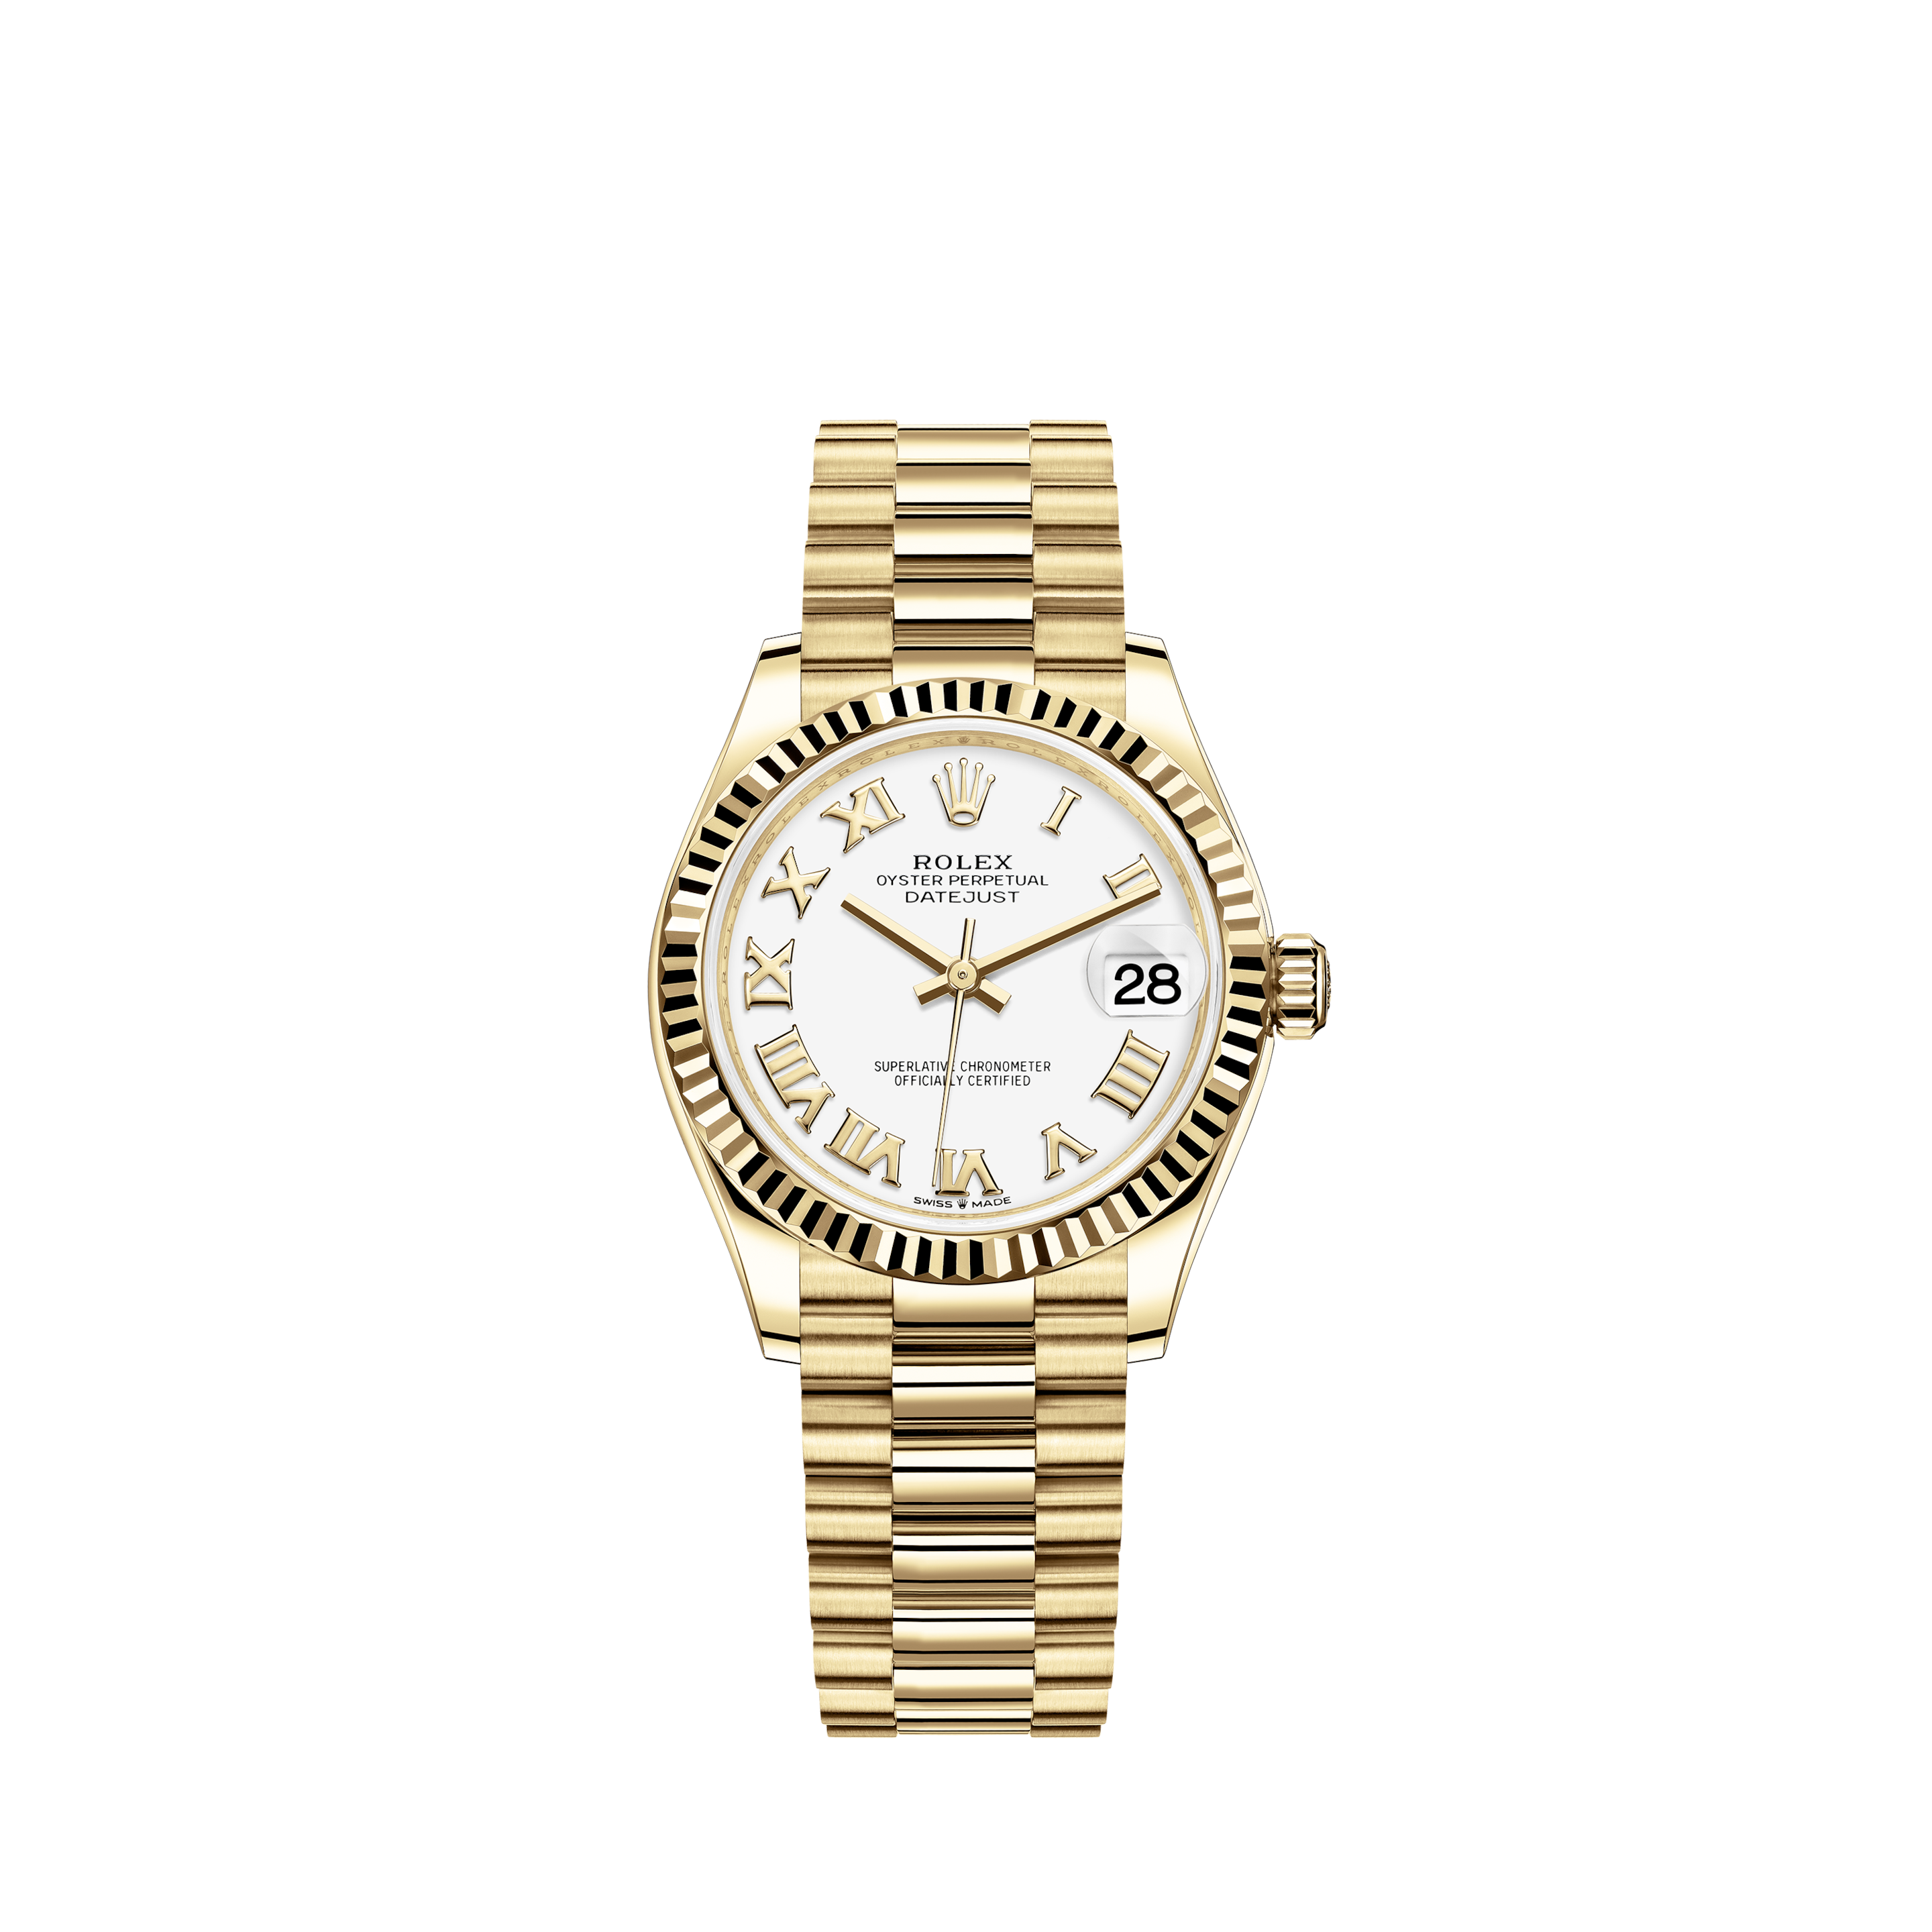 Rolex New Style Datejust Two Tone Fluted Bezel & Custom Silver Diamond Dial on Oyster BraceletRolex New Style Datejust Two Tone Fluted Bezel & Custom White Diamond Dial on Jubilee Bracelet